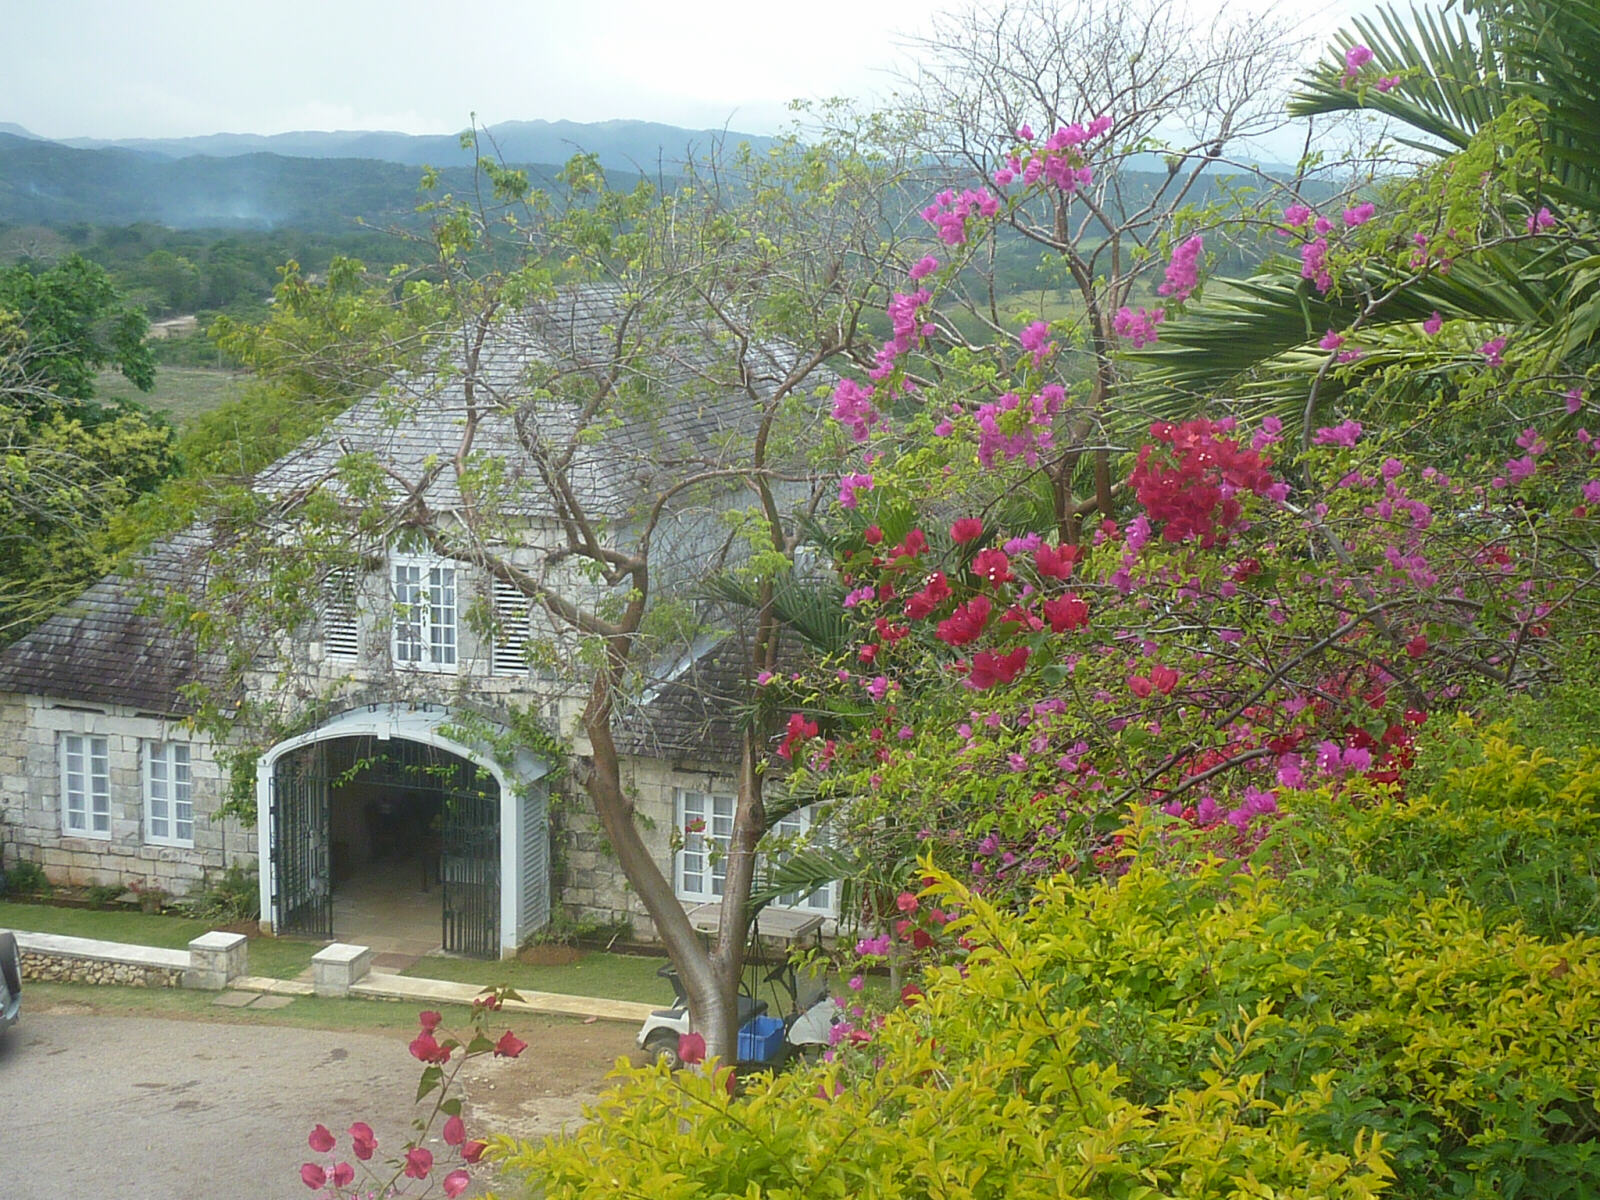 The carriage house at Good Hope plantation, Jamaica